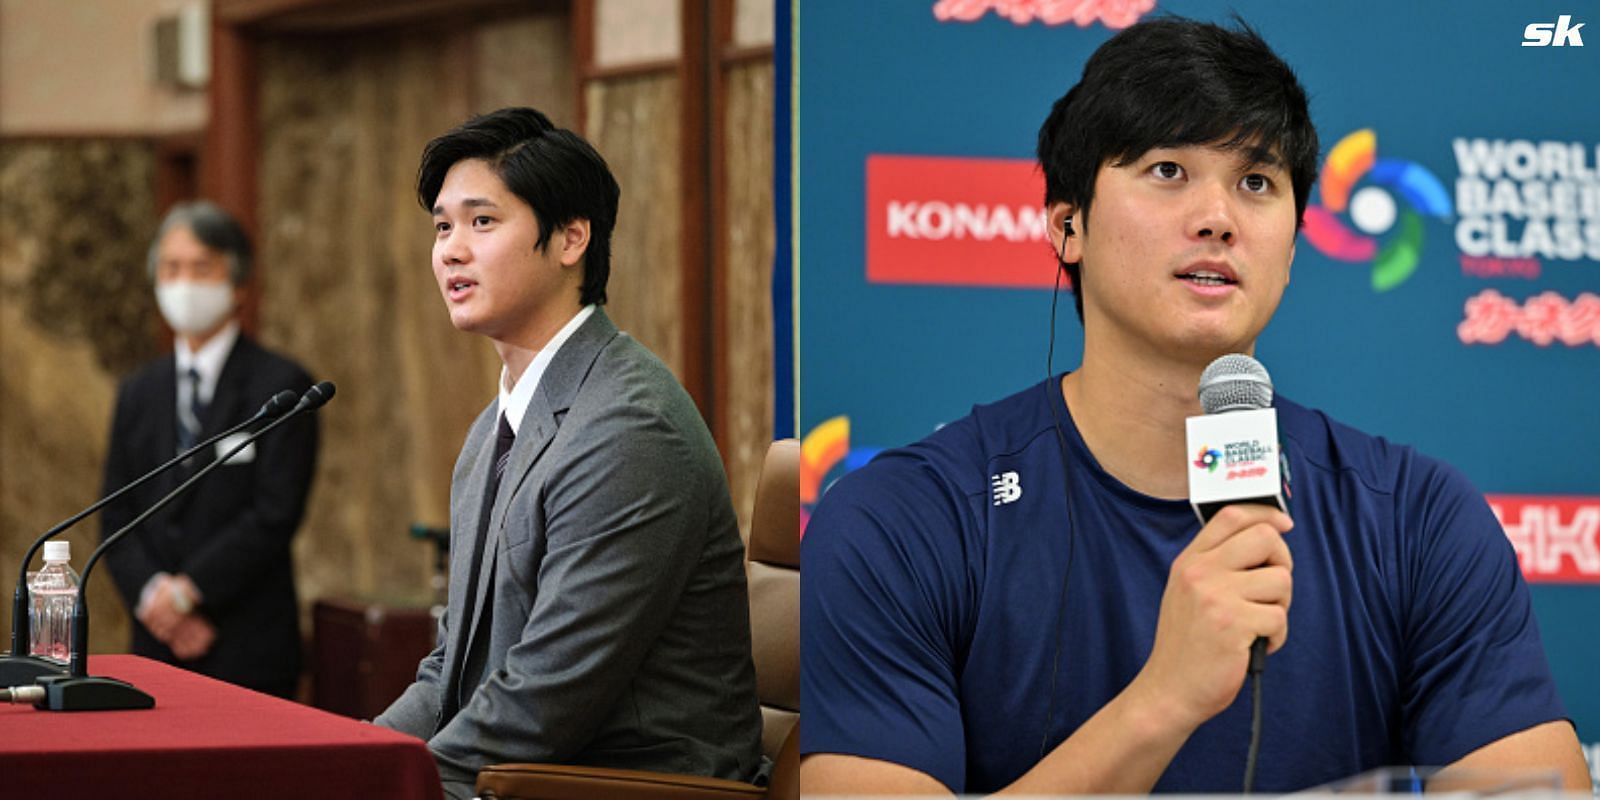 Shohei Ohtani set to address the media on Monday for the first time after the Ippei Mizuhara betting scandal